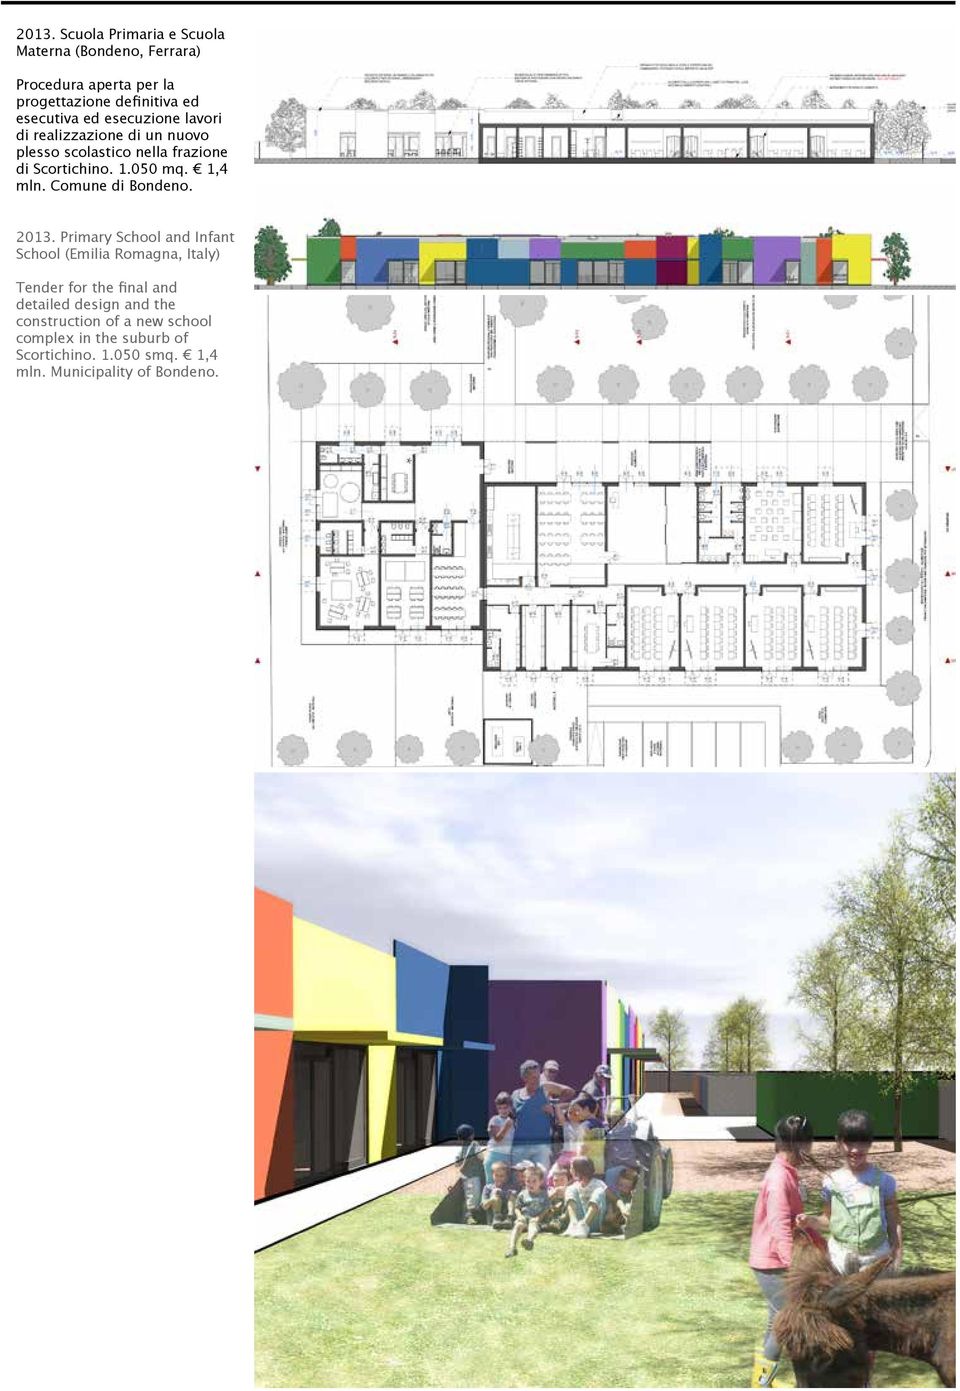 Primary School and Infant School (Emilia Romagna, Italy) detailed design and the